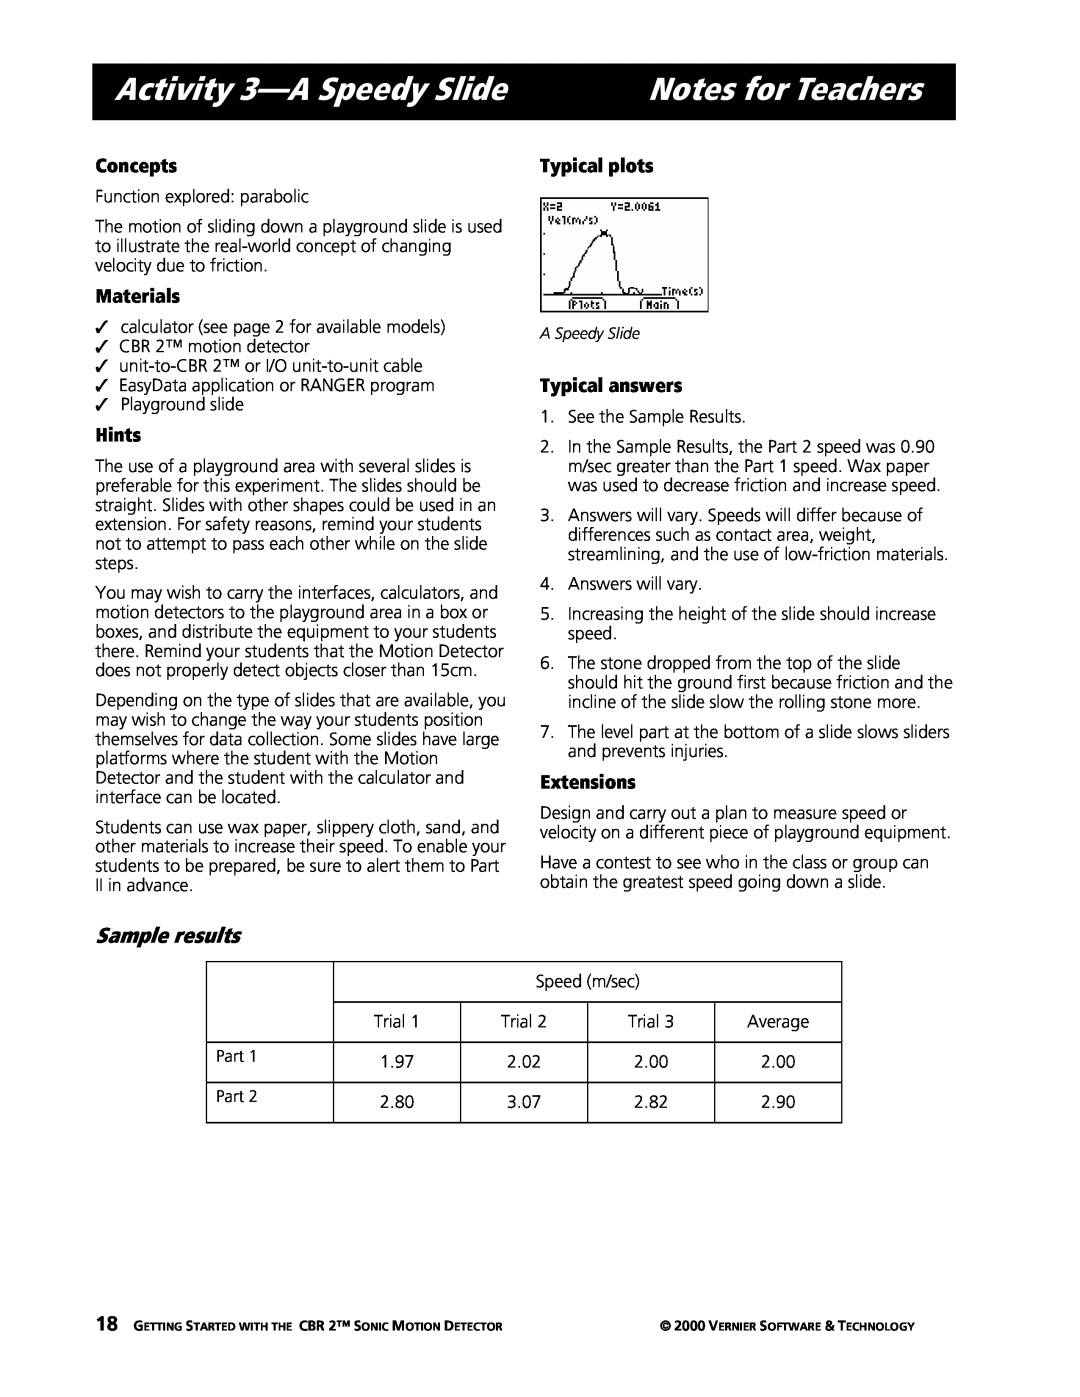 Texas Instruments CBR 2 manual Activity 3-ASpeedy Slide, Notes for Teachers, Concepts, Materials, Hints, Typical plots 